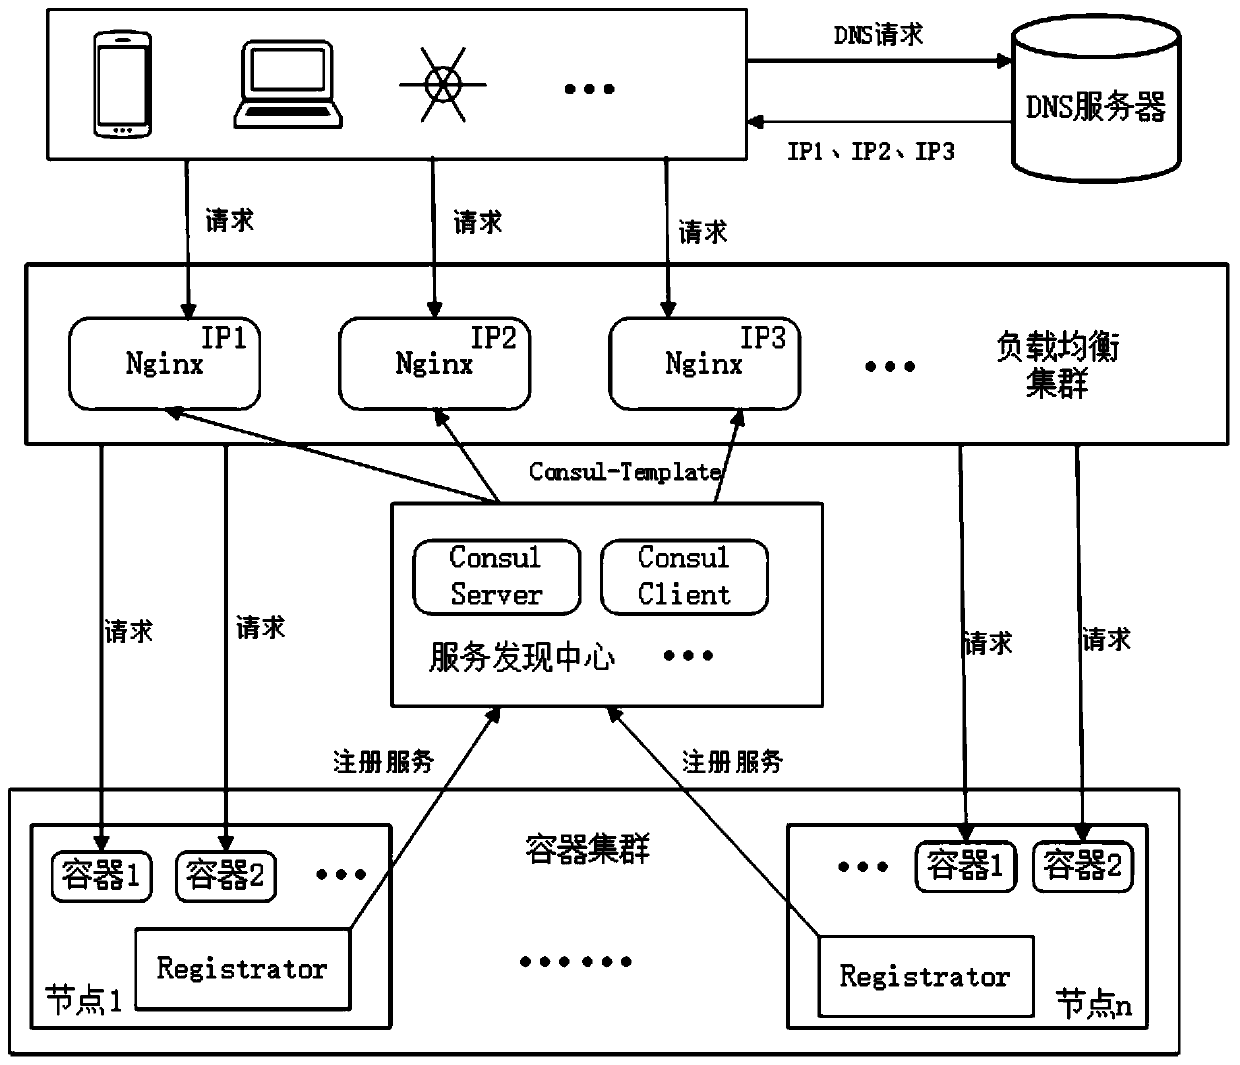 Internet of Things platform construction method based on micro-service architecture